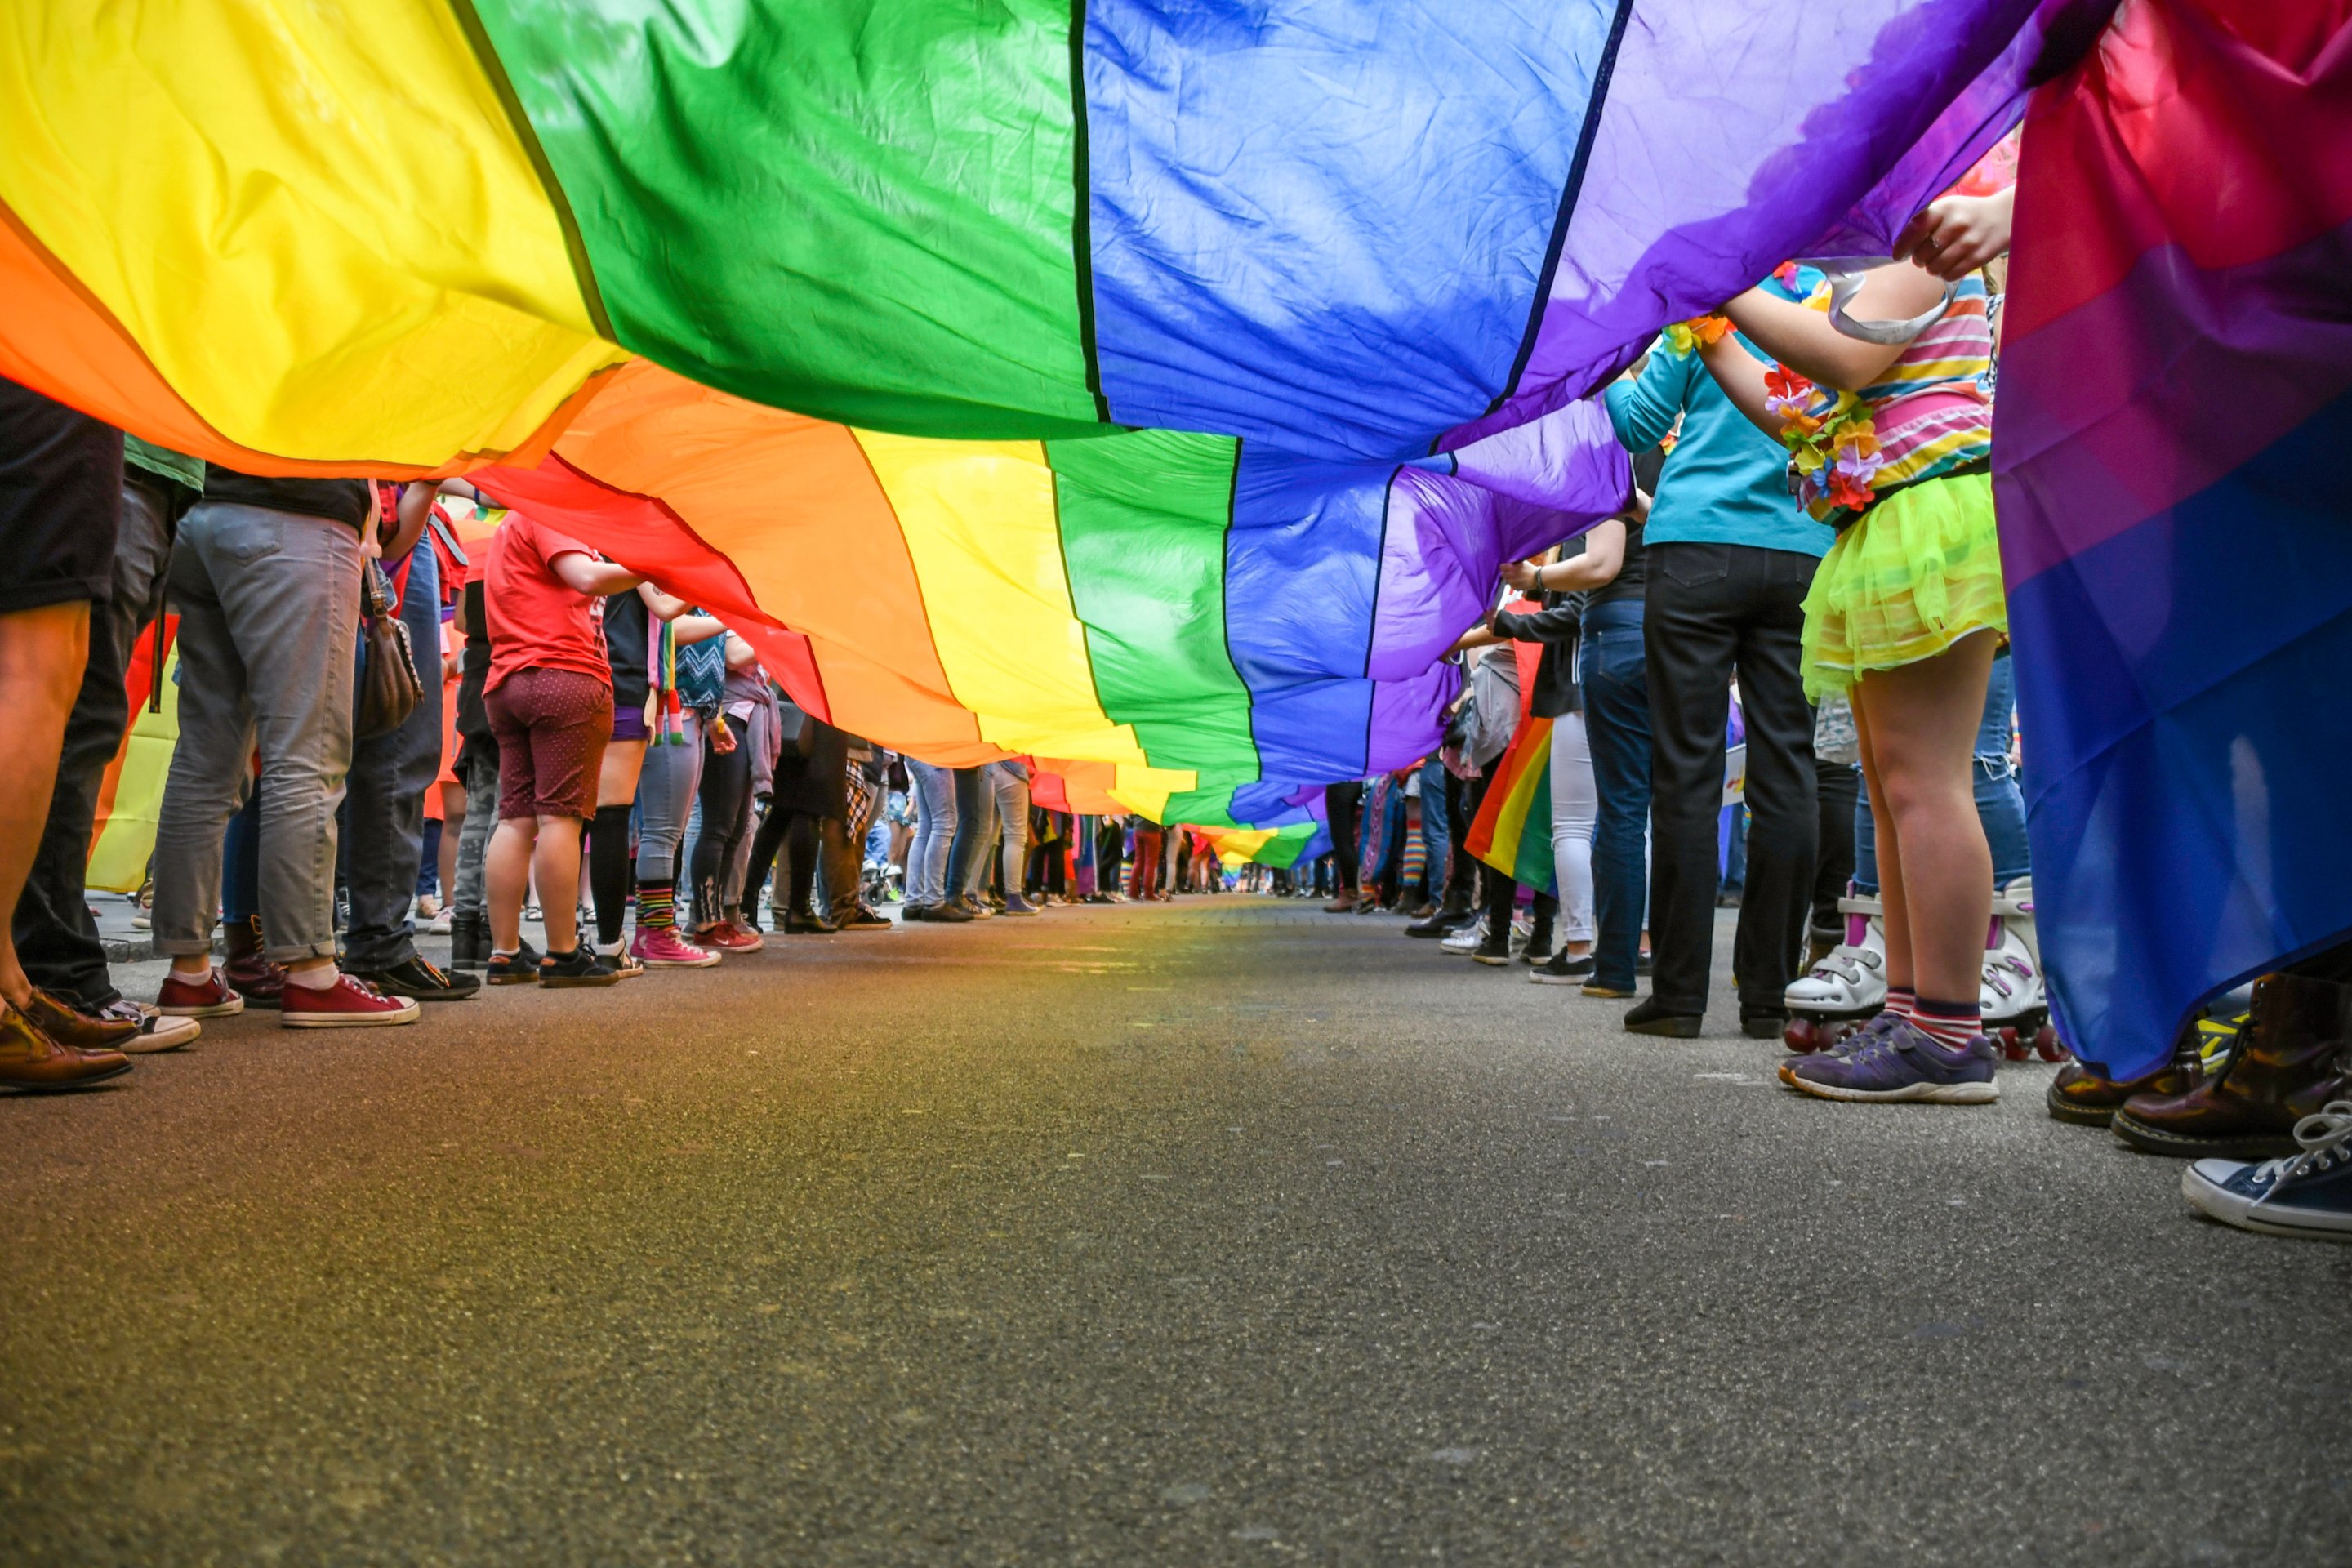 Gay-Straight Alliance clubs come under attack at schools